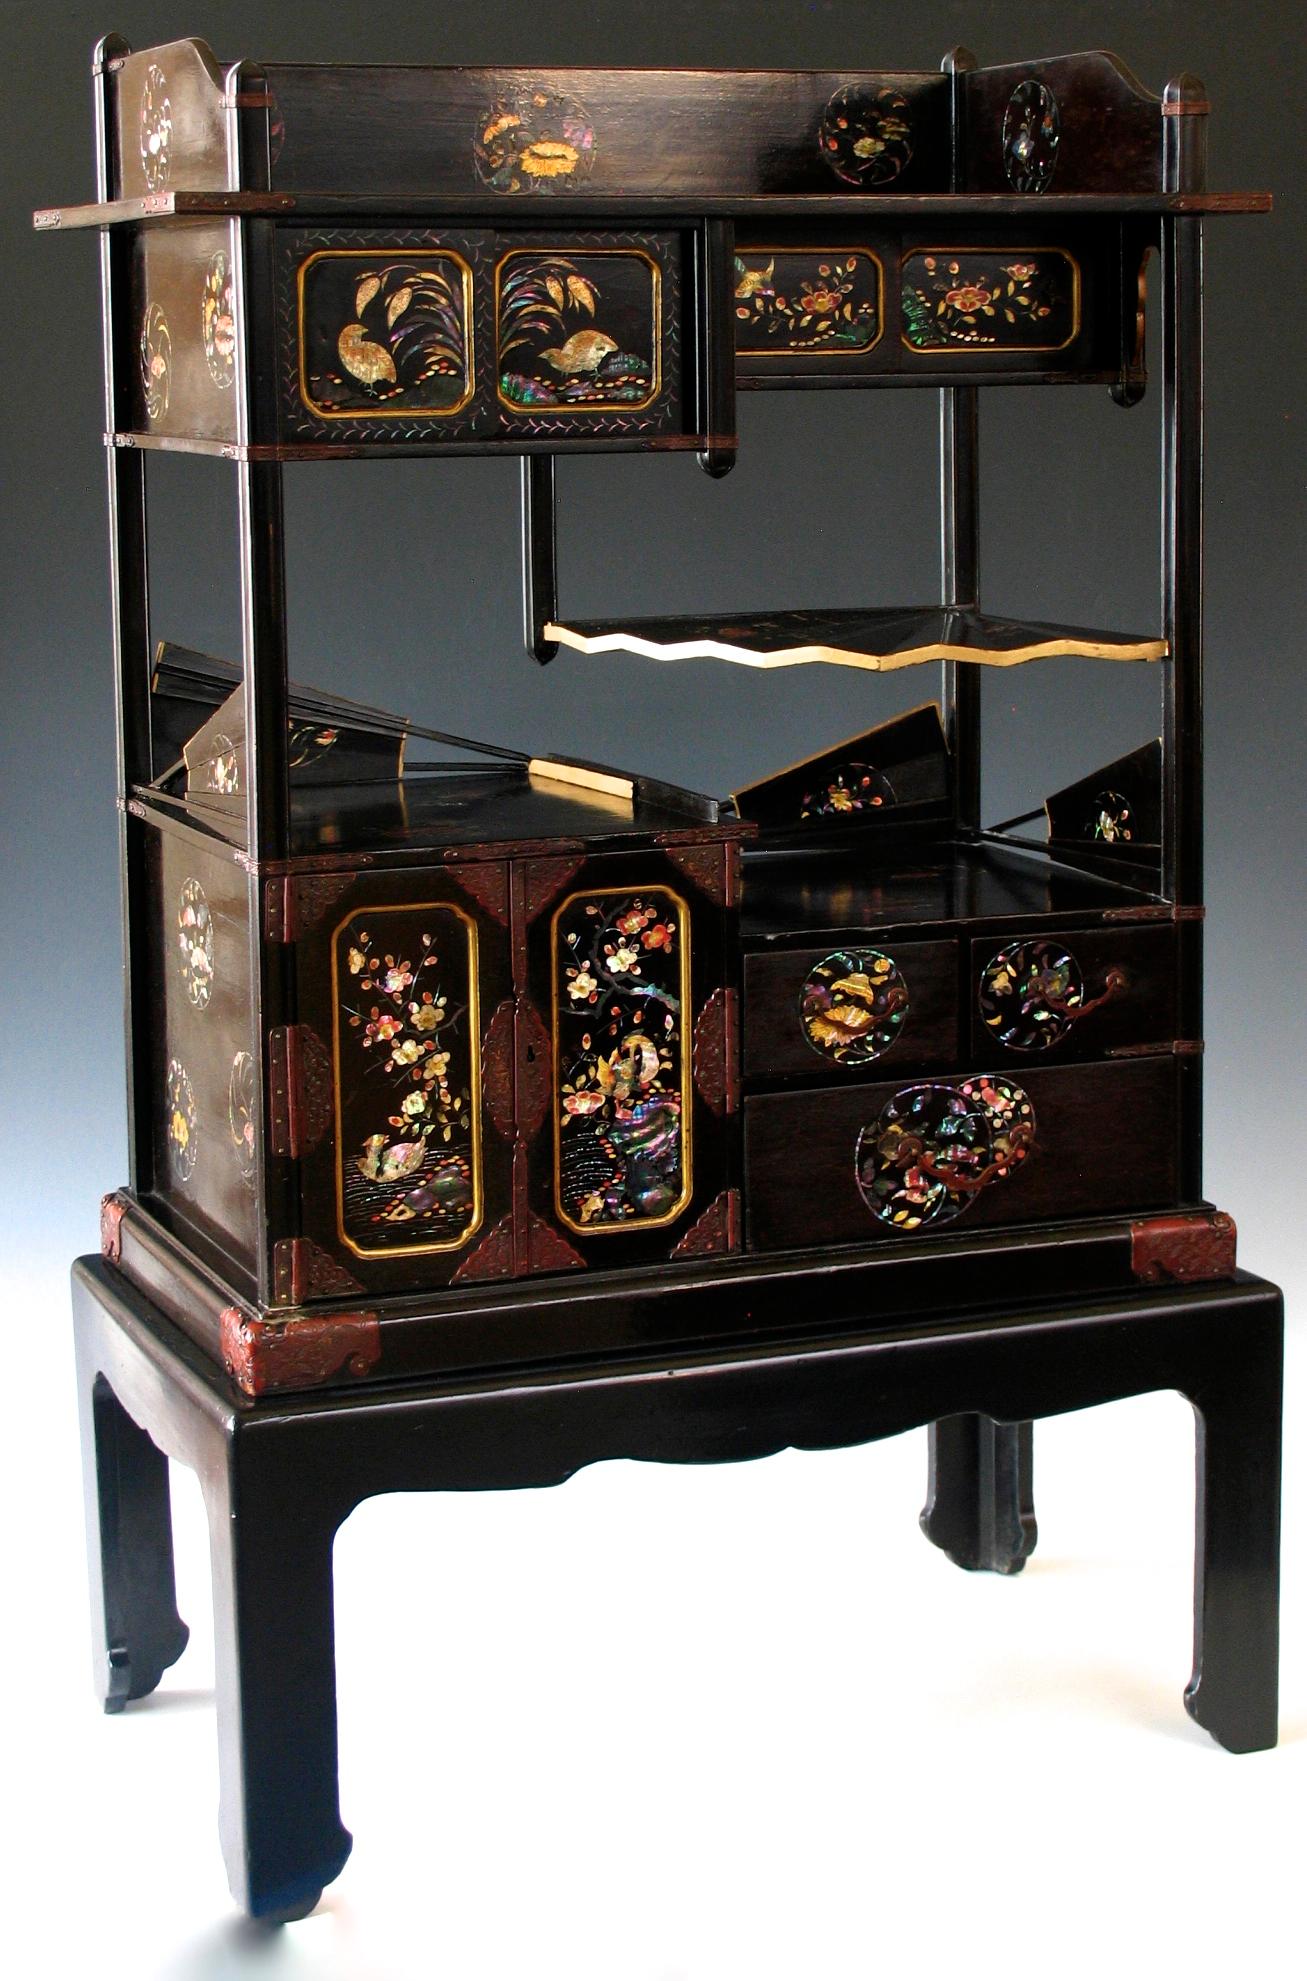 Japanese Nagasaki lacquer and colored mother of pearl inlaid display cabinet (Kazaridana) on a stand, possibly intended for export, with the charming design of folding fans as the railings and one open fan shape as a shelf, four shelf tiers in